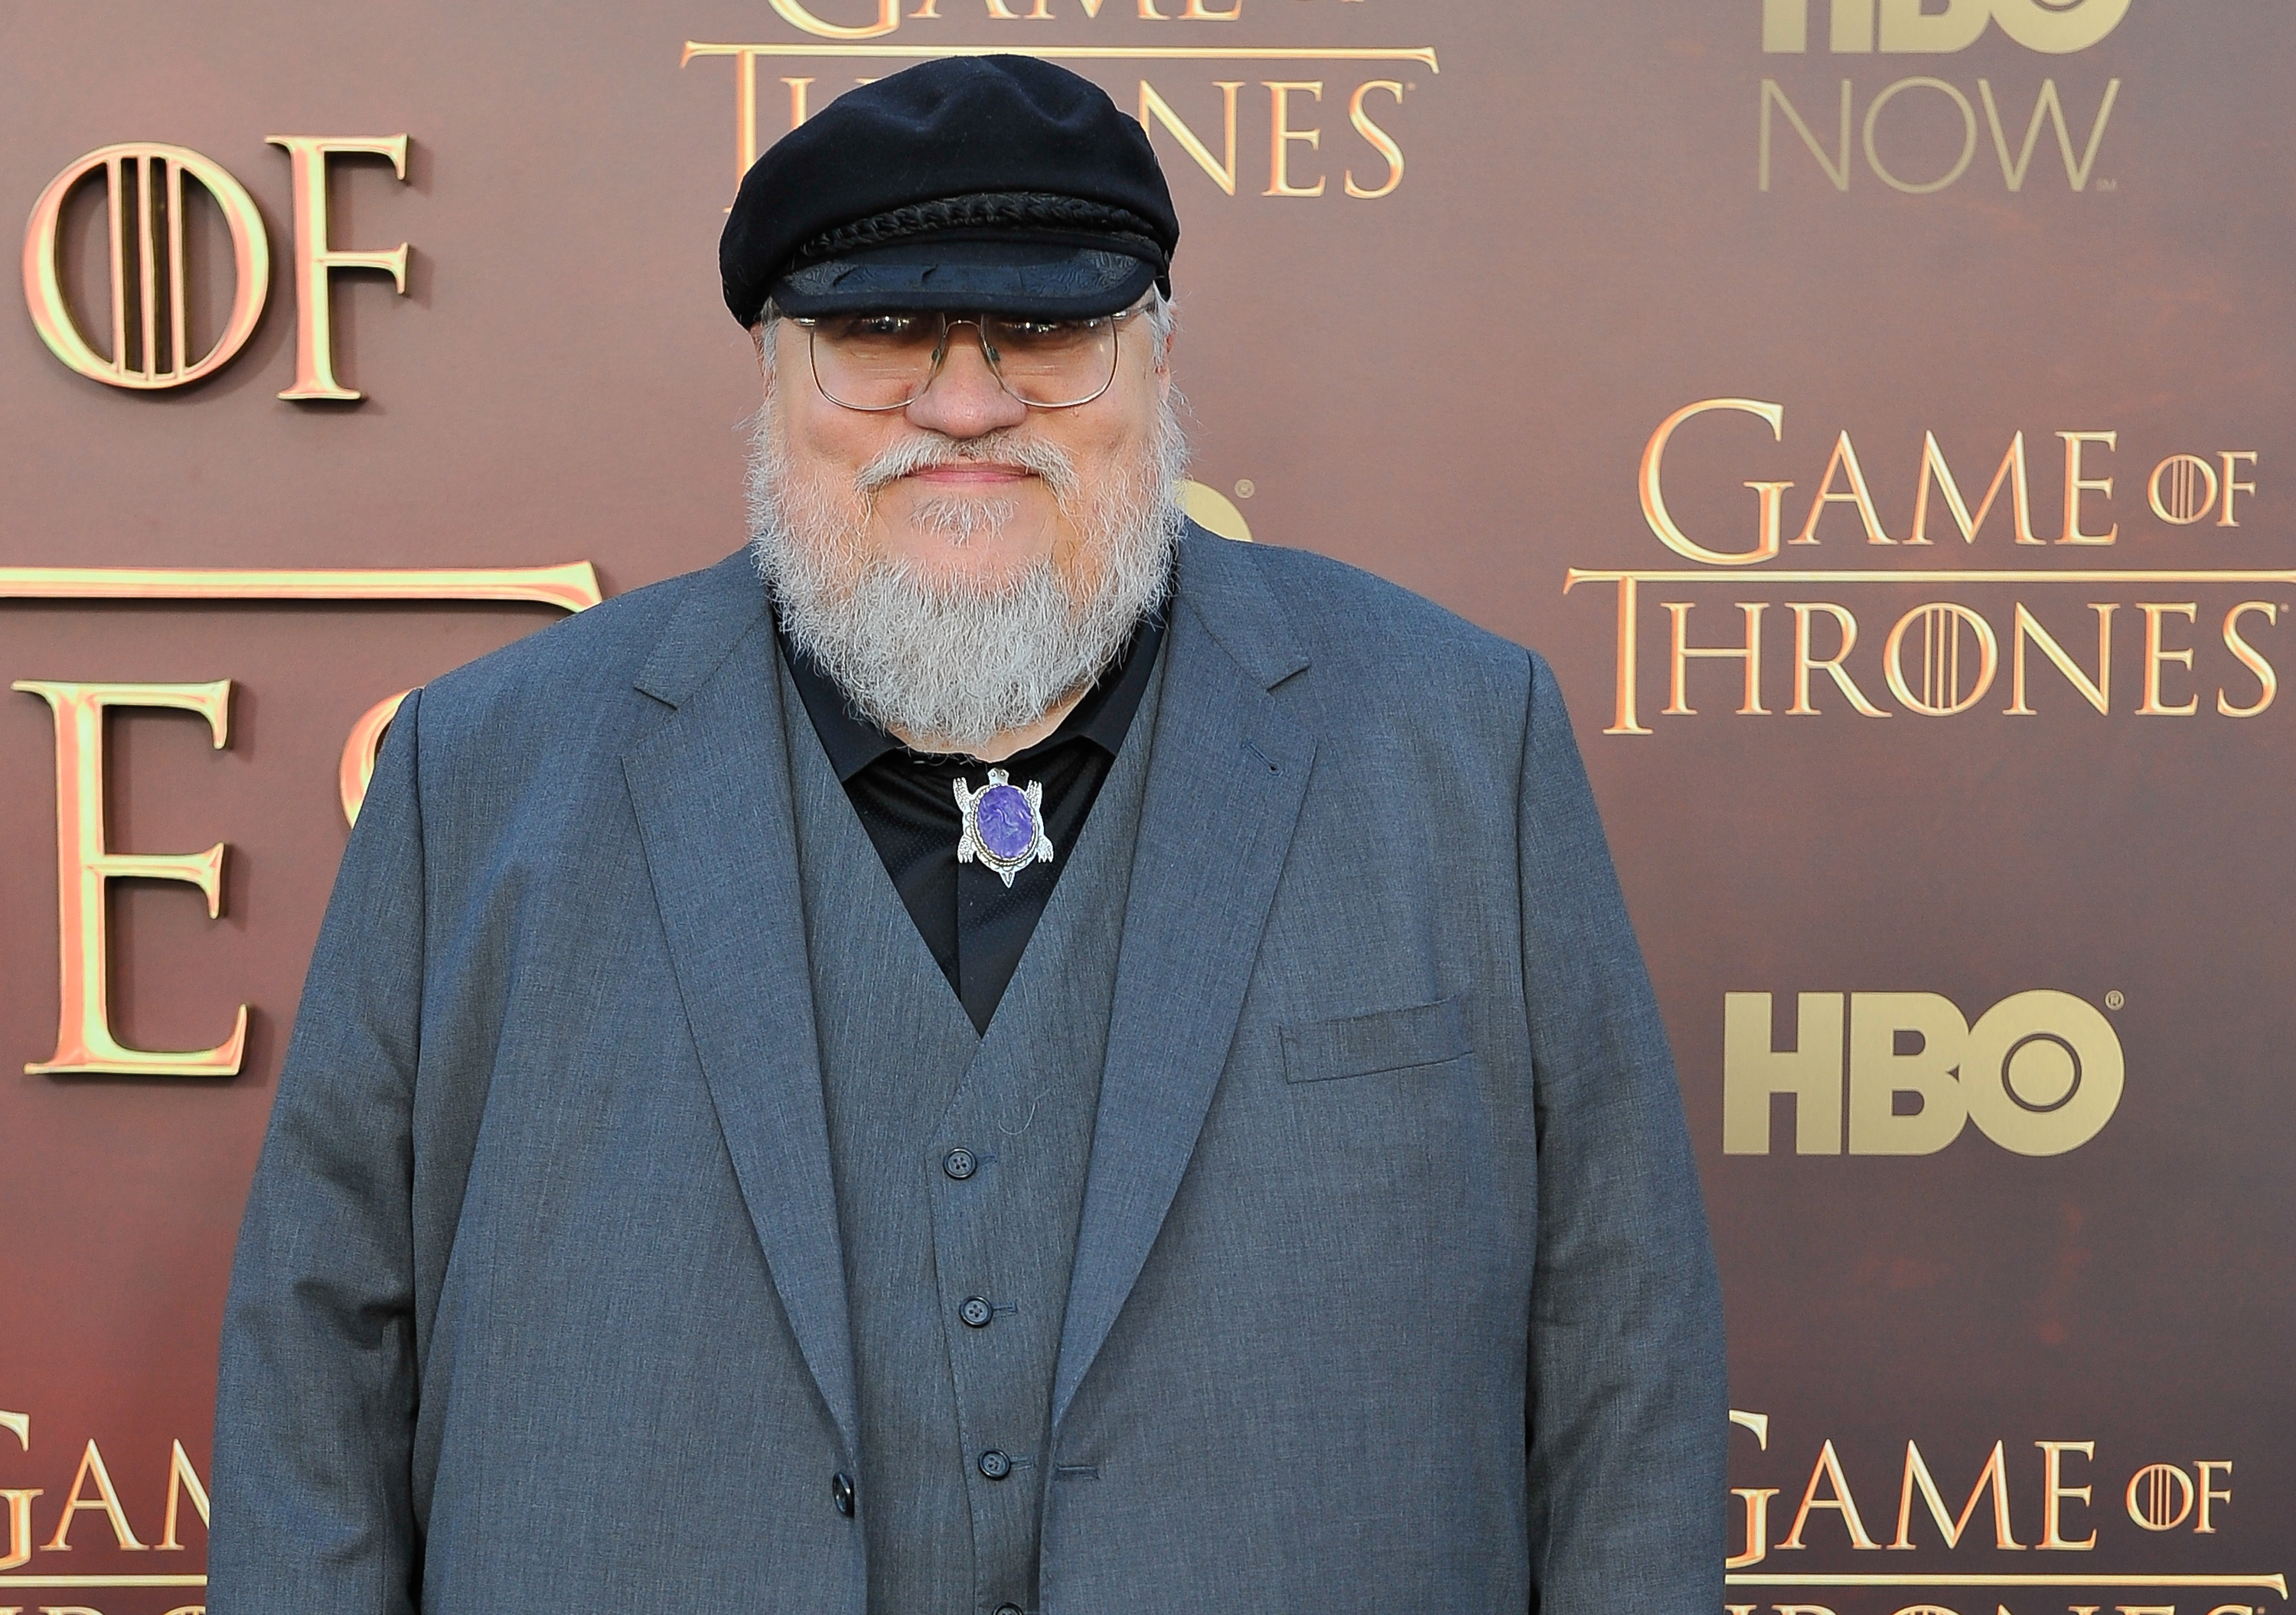 George R.R. Martin Writer/Co-Executive Producer attends HBO's 